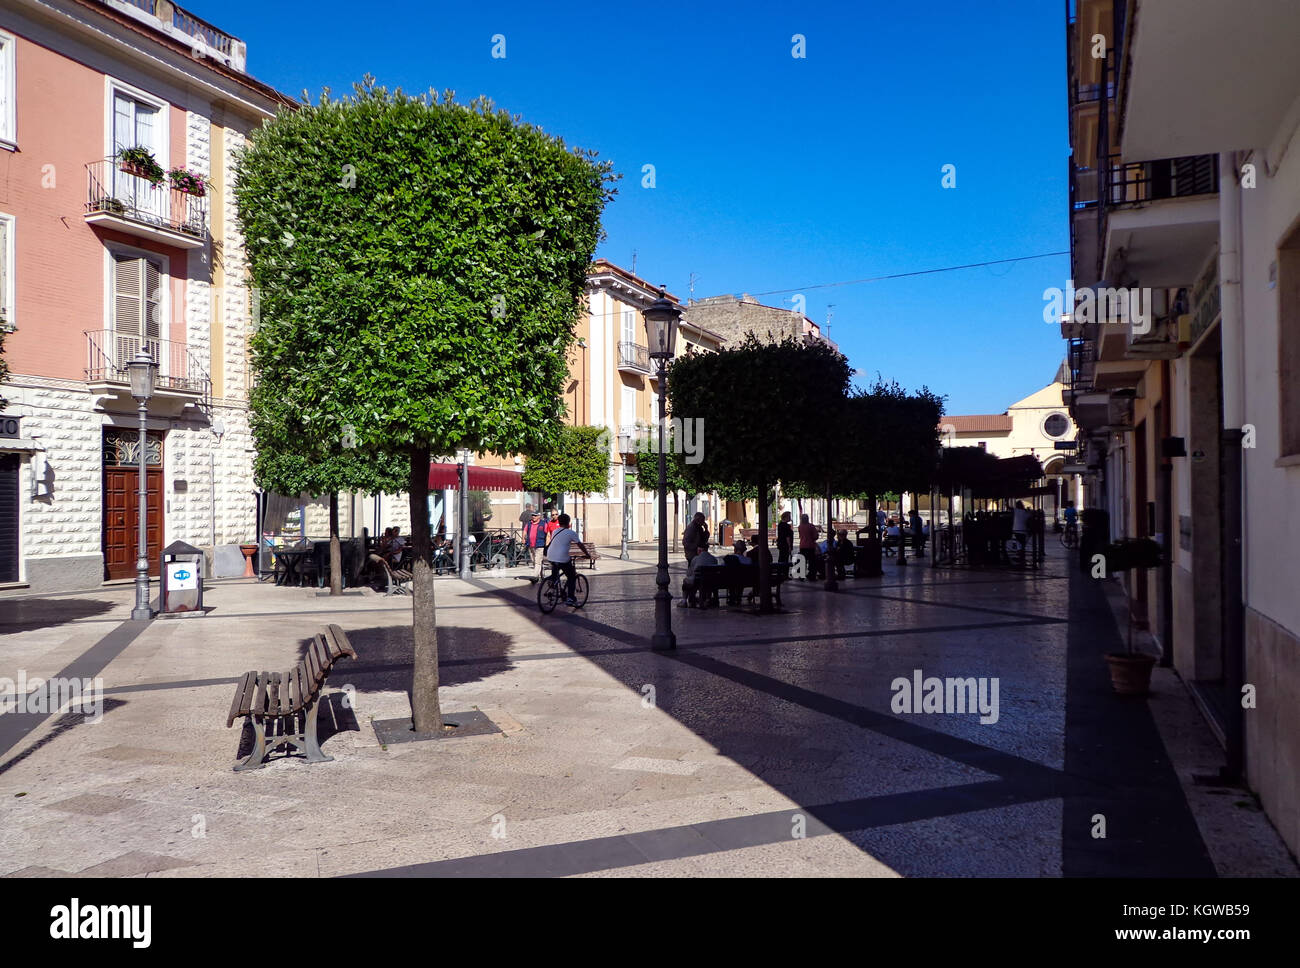 Fondi, Italy - 10 june 2013: View of Matteotti square. Fondi's urban core is located in the south pontino halfway between Rome and Naples. Stock Photo